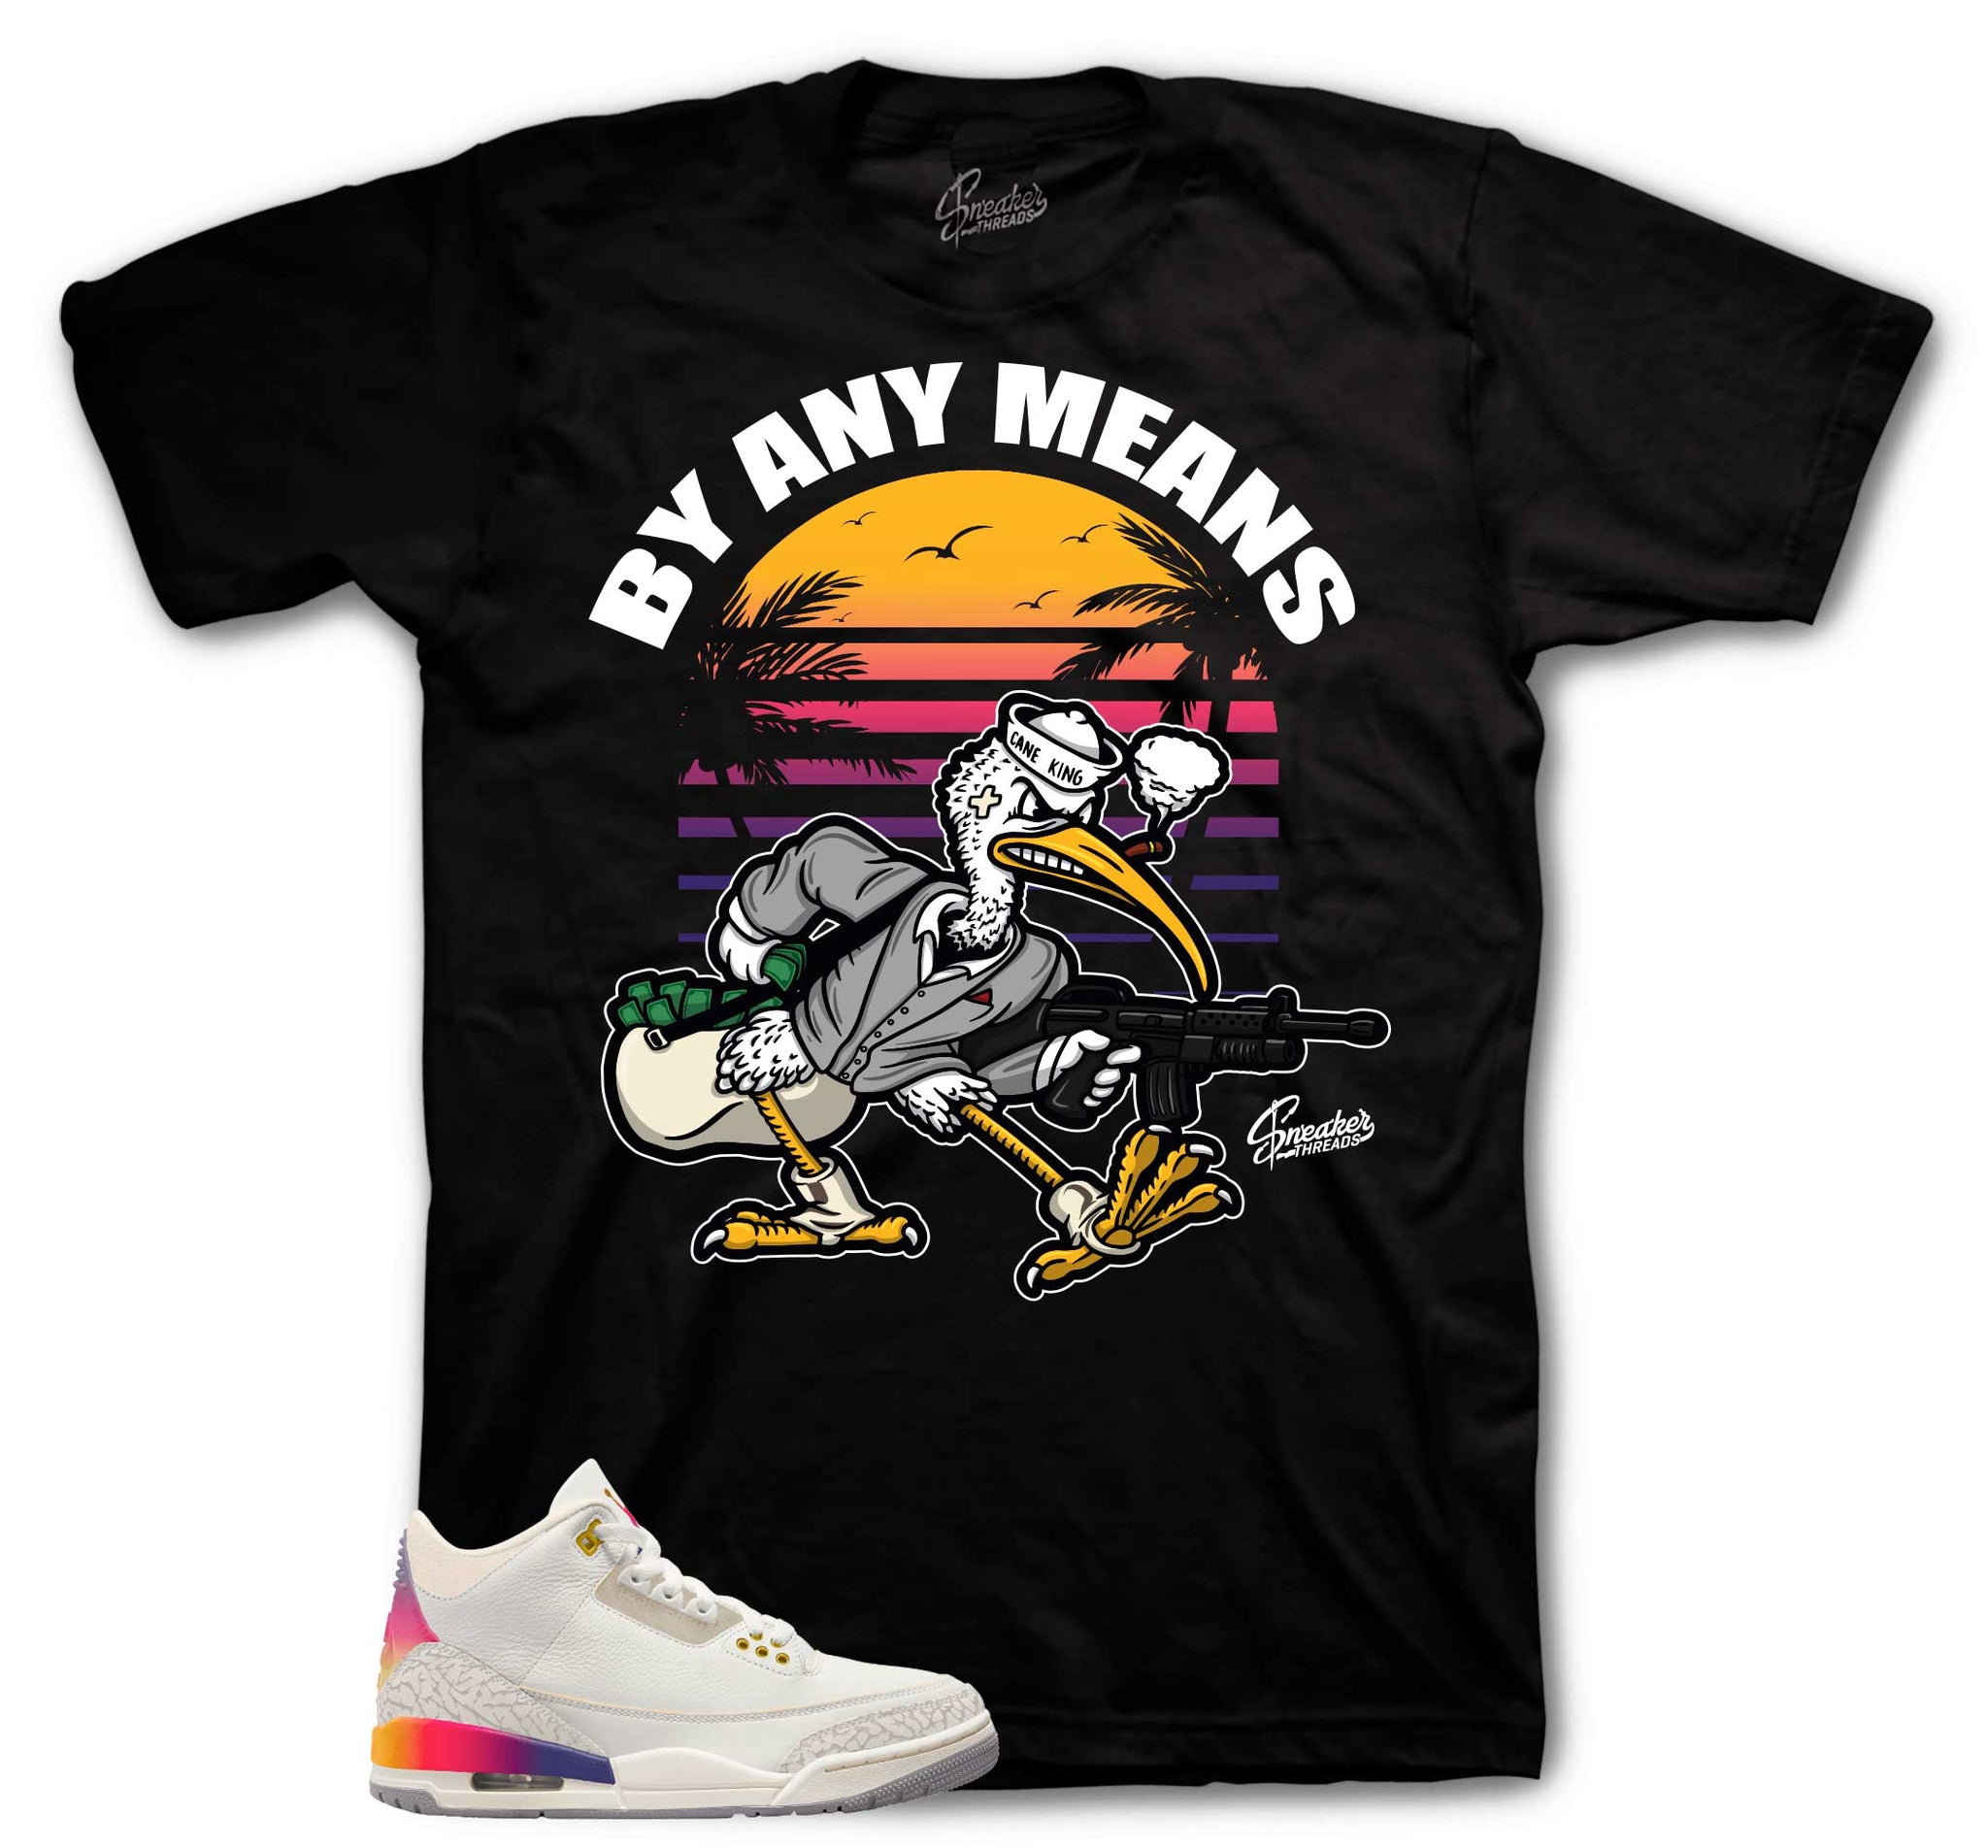 Retro 3 Sunset Shirt - By Any Means - Black